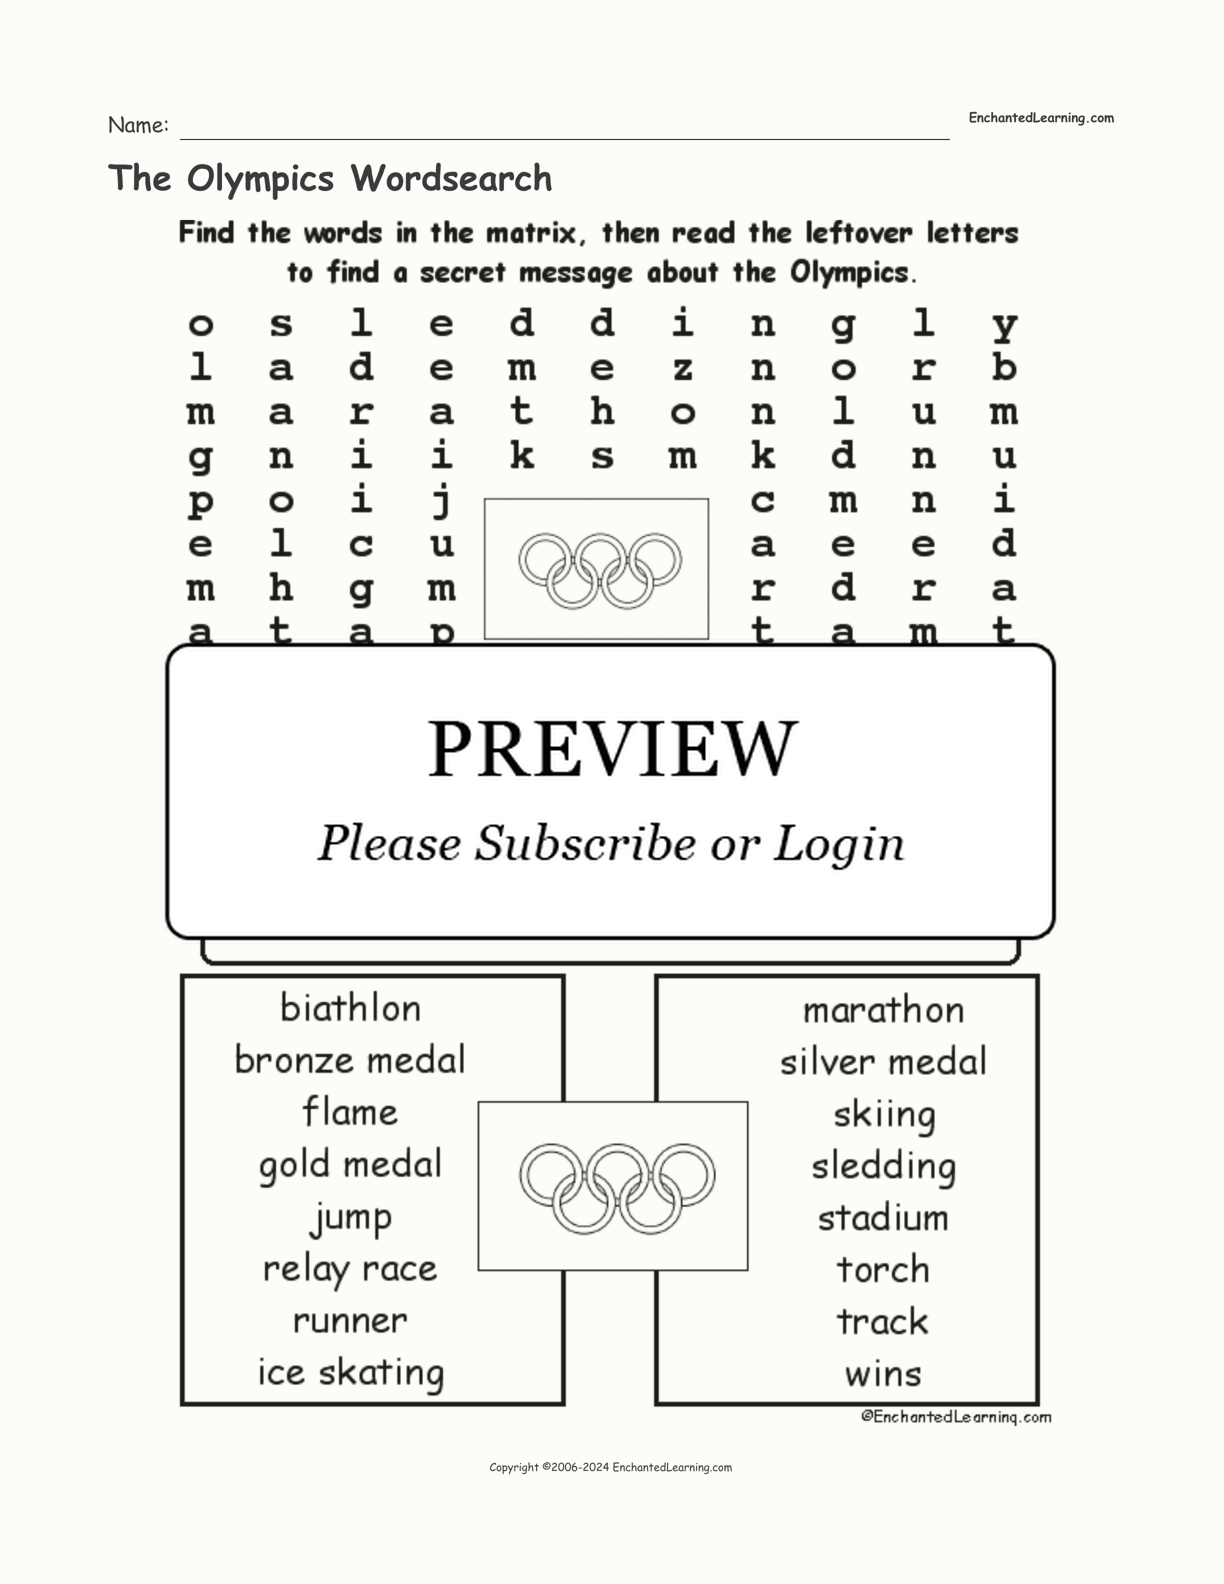 The Olympics Wordsearch interactive worksheet page 1